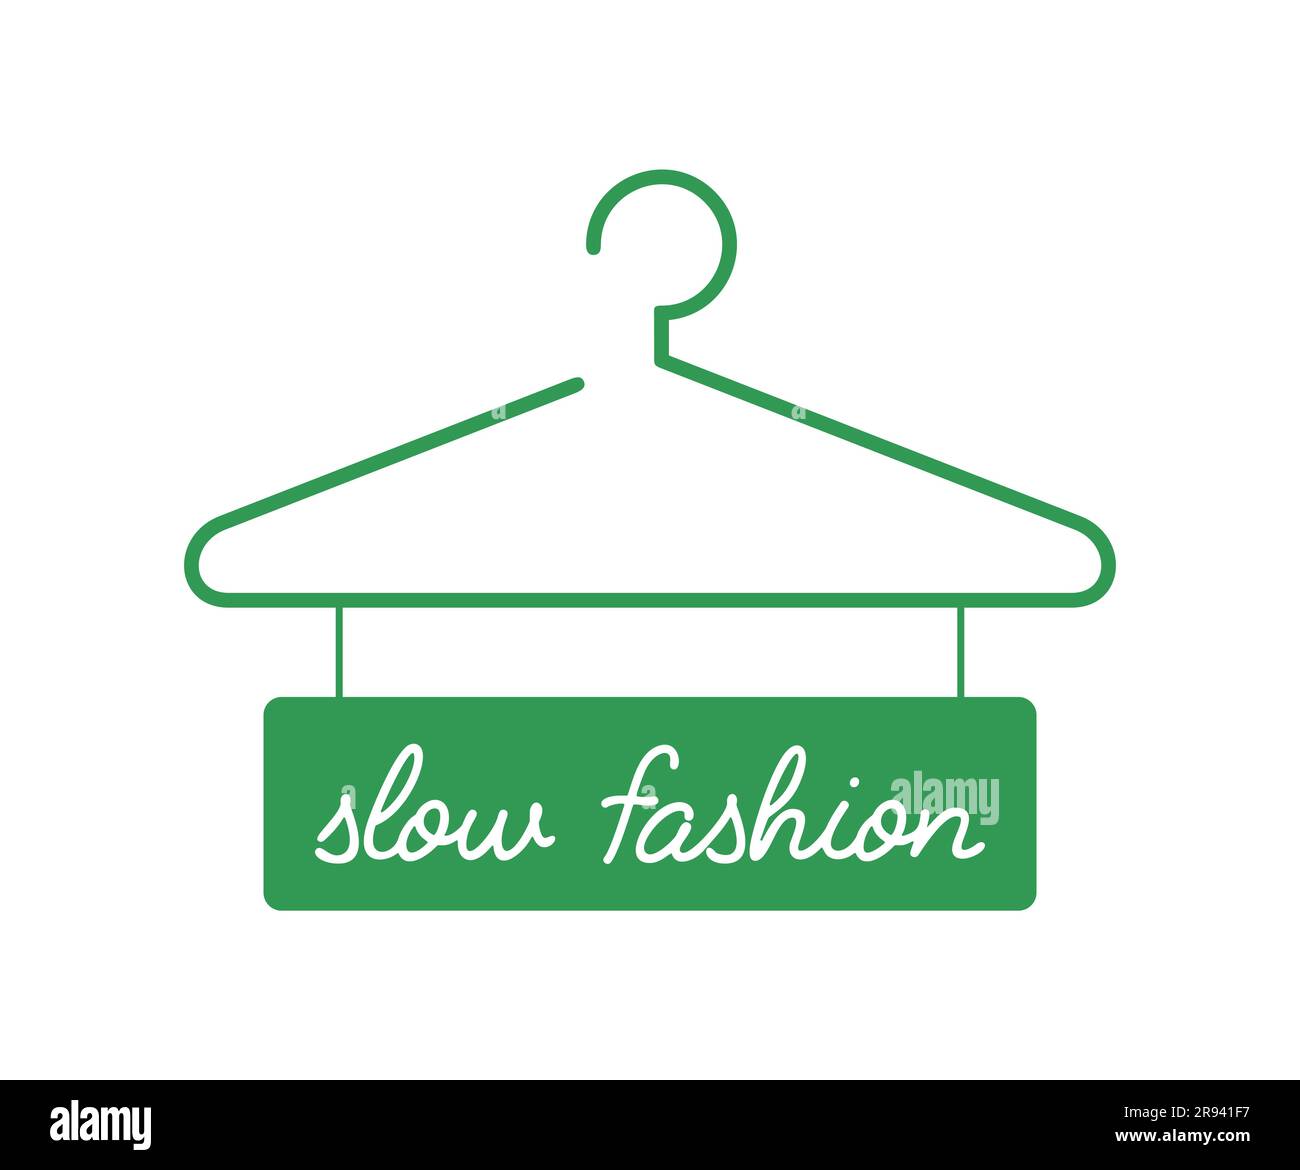 Fashion Revolution Sustainability Slow Fashion Ethical Consumerism PNG,  Clipart, Black, Black And White, Brand, Calligraphy, Clothing